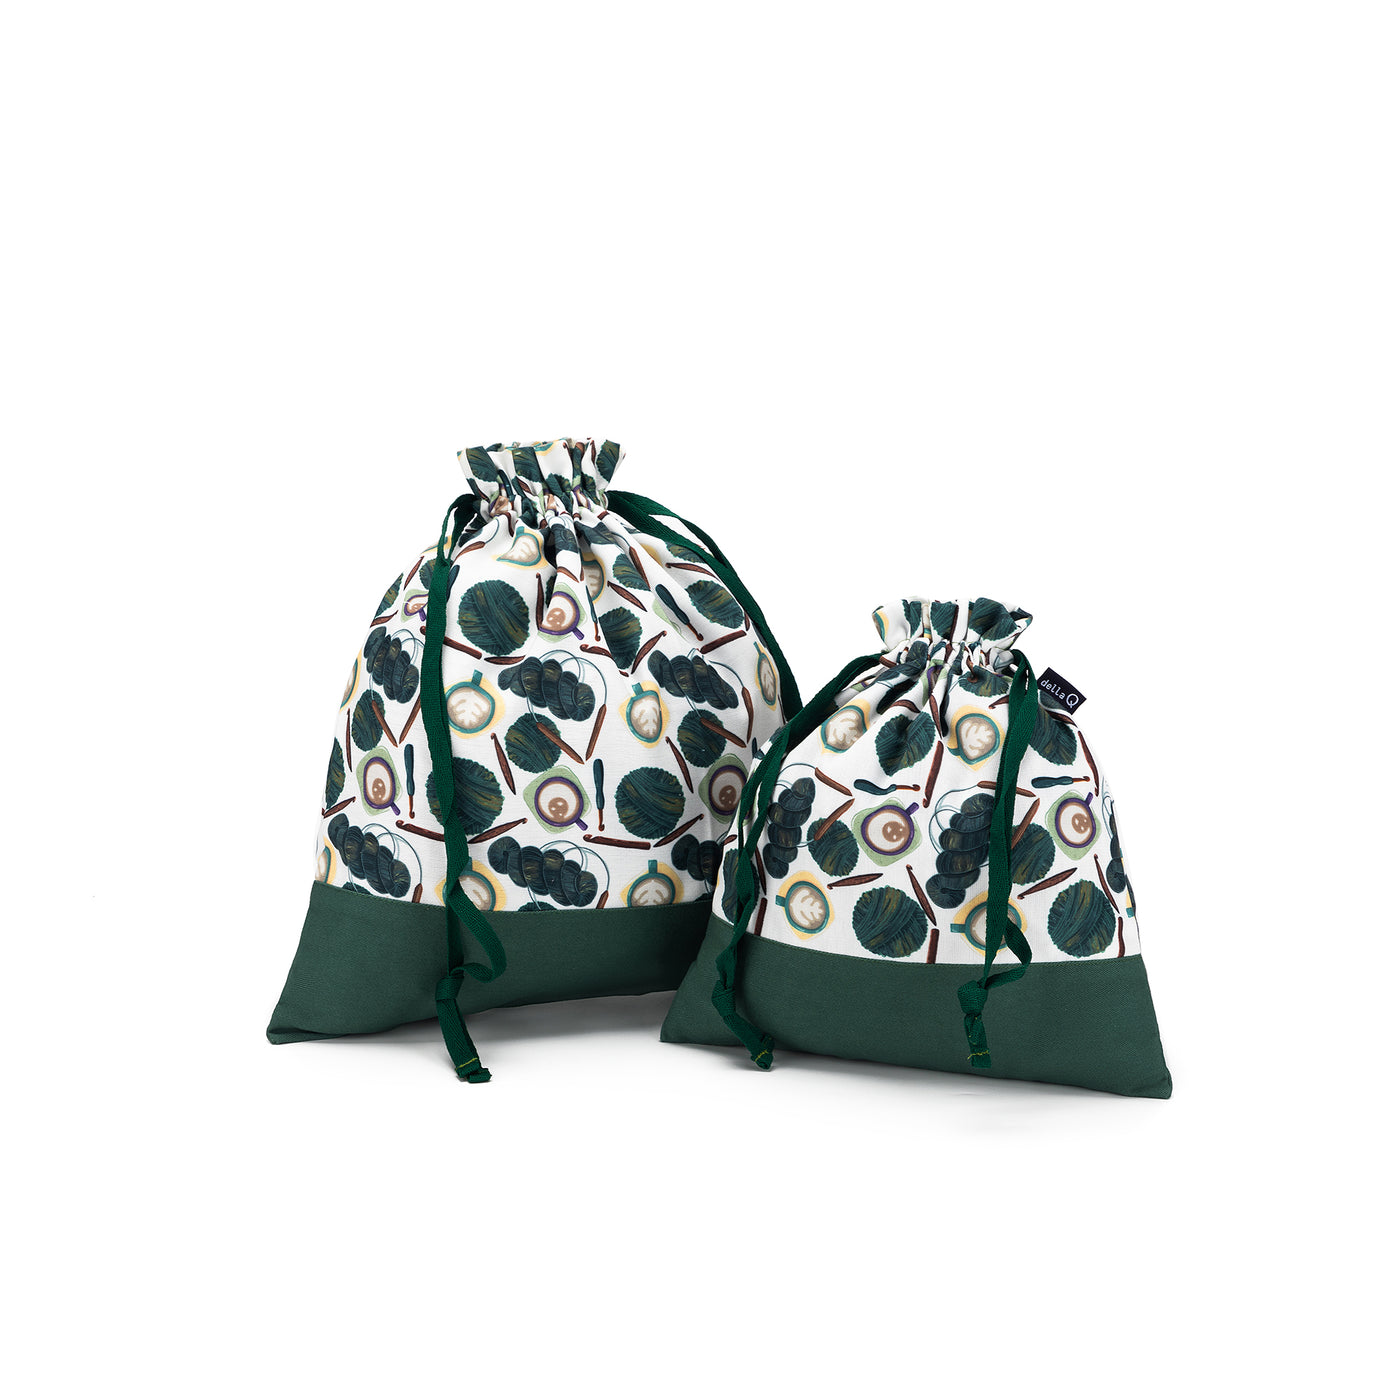 Large Eden Project Bag | Coffee and Yarn Green Fabric Print (PREORDER)